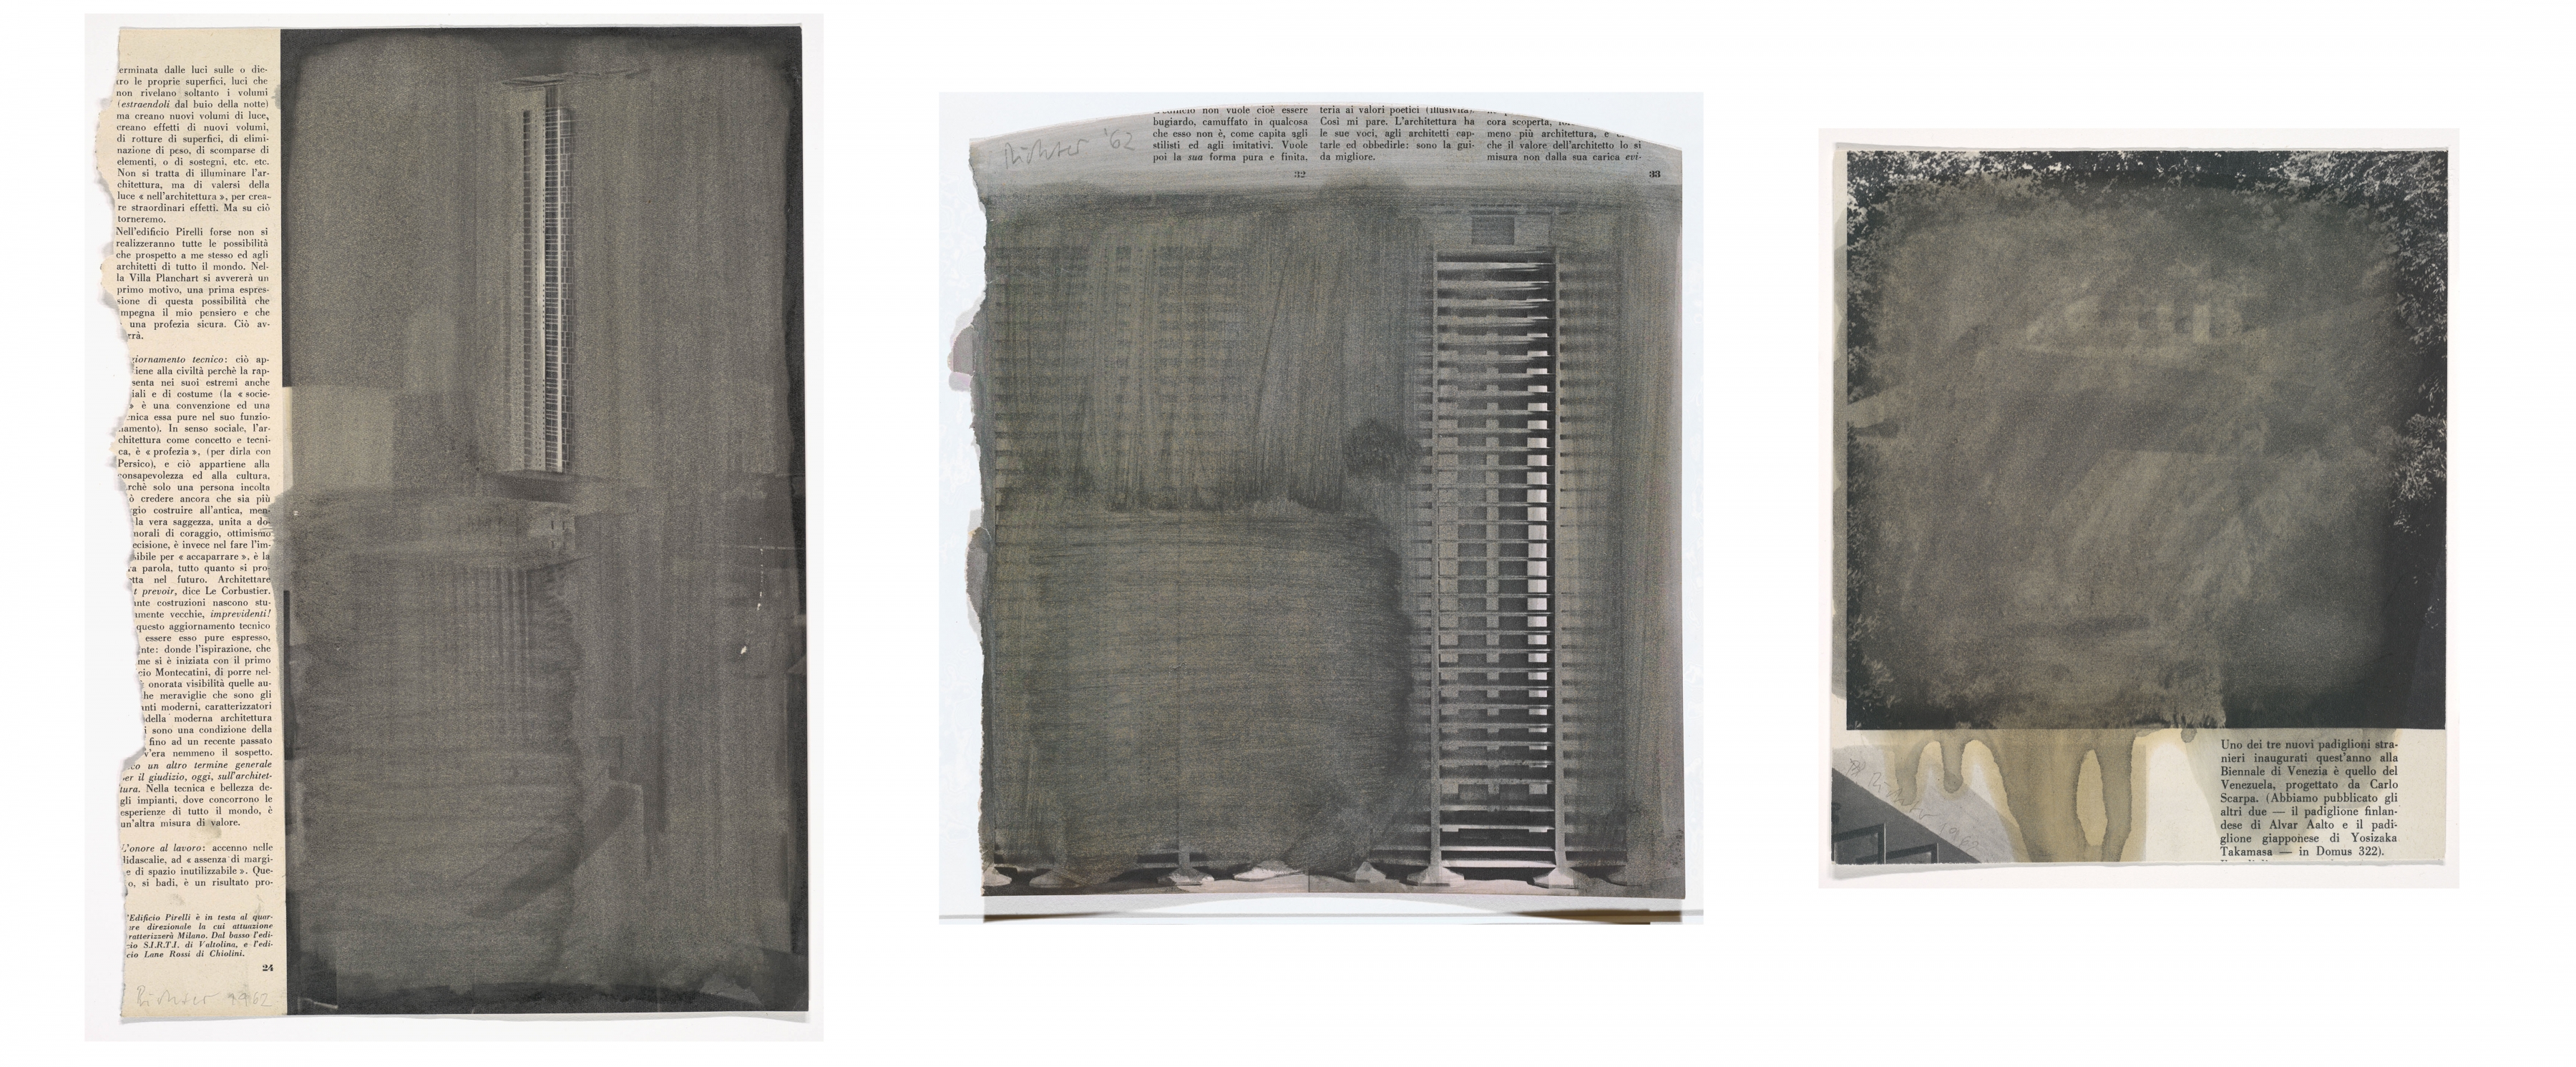 above left, middle, and right: GERHARD RICHTER, Untitled, 1962, solvent on printed paper, dimensions vary, Harvard Art Museums/Busch-Reisinger Museum.

As in Untitled (Chair), Richter sourced material from the pages of Domus for all three of these drawings, from pages 24, 32, and 33 of the March 1956 issue. Italian decorative arts, object design avant-gardes, modernist architecture (the image on the right is a wisp of a Carlo Scarpa, the Venezuelan Pavilion in the Giardini in Venice)&mdash;though Richter cites his interest in the &ldquo;documentary topicality&rdquo; of magazine illustrations, the images culled from the high-gloss Domus stand in contrast to his source imagery in later works, most of which take as their models low-quality reproductions from popular German weeklies, such as&nbsp;Quick, the first magazine published in Germany after WWII, Stern, and Bunte Illustrierte.&nbsp;However, in a 1970 interview with Rolf-Gunter Dienst, Richter asserts that &ldquo;negative selection&rdquo; [8] was the real driving force and that he consciously distanced himself from material that corresponded to &ldquo;known problems or any problem,&rdquo; [9] painterly, social, or aesthetic: &ldquo;I tried not to find anything concrete. Therefore, there were so many trivial themes; and again I had to be careful not to let triviality become my problem and my emblem. You may call that flight&hellip;&rdquo; [10]